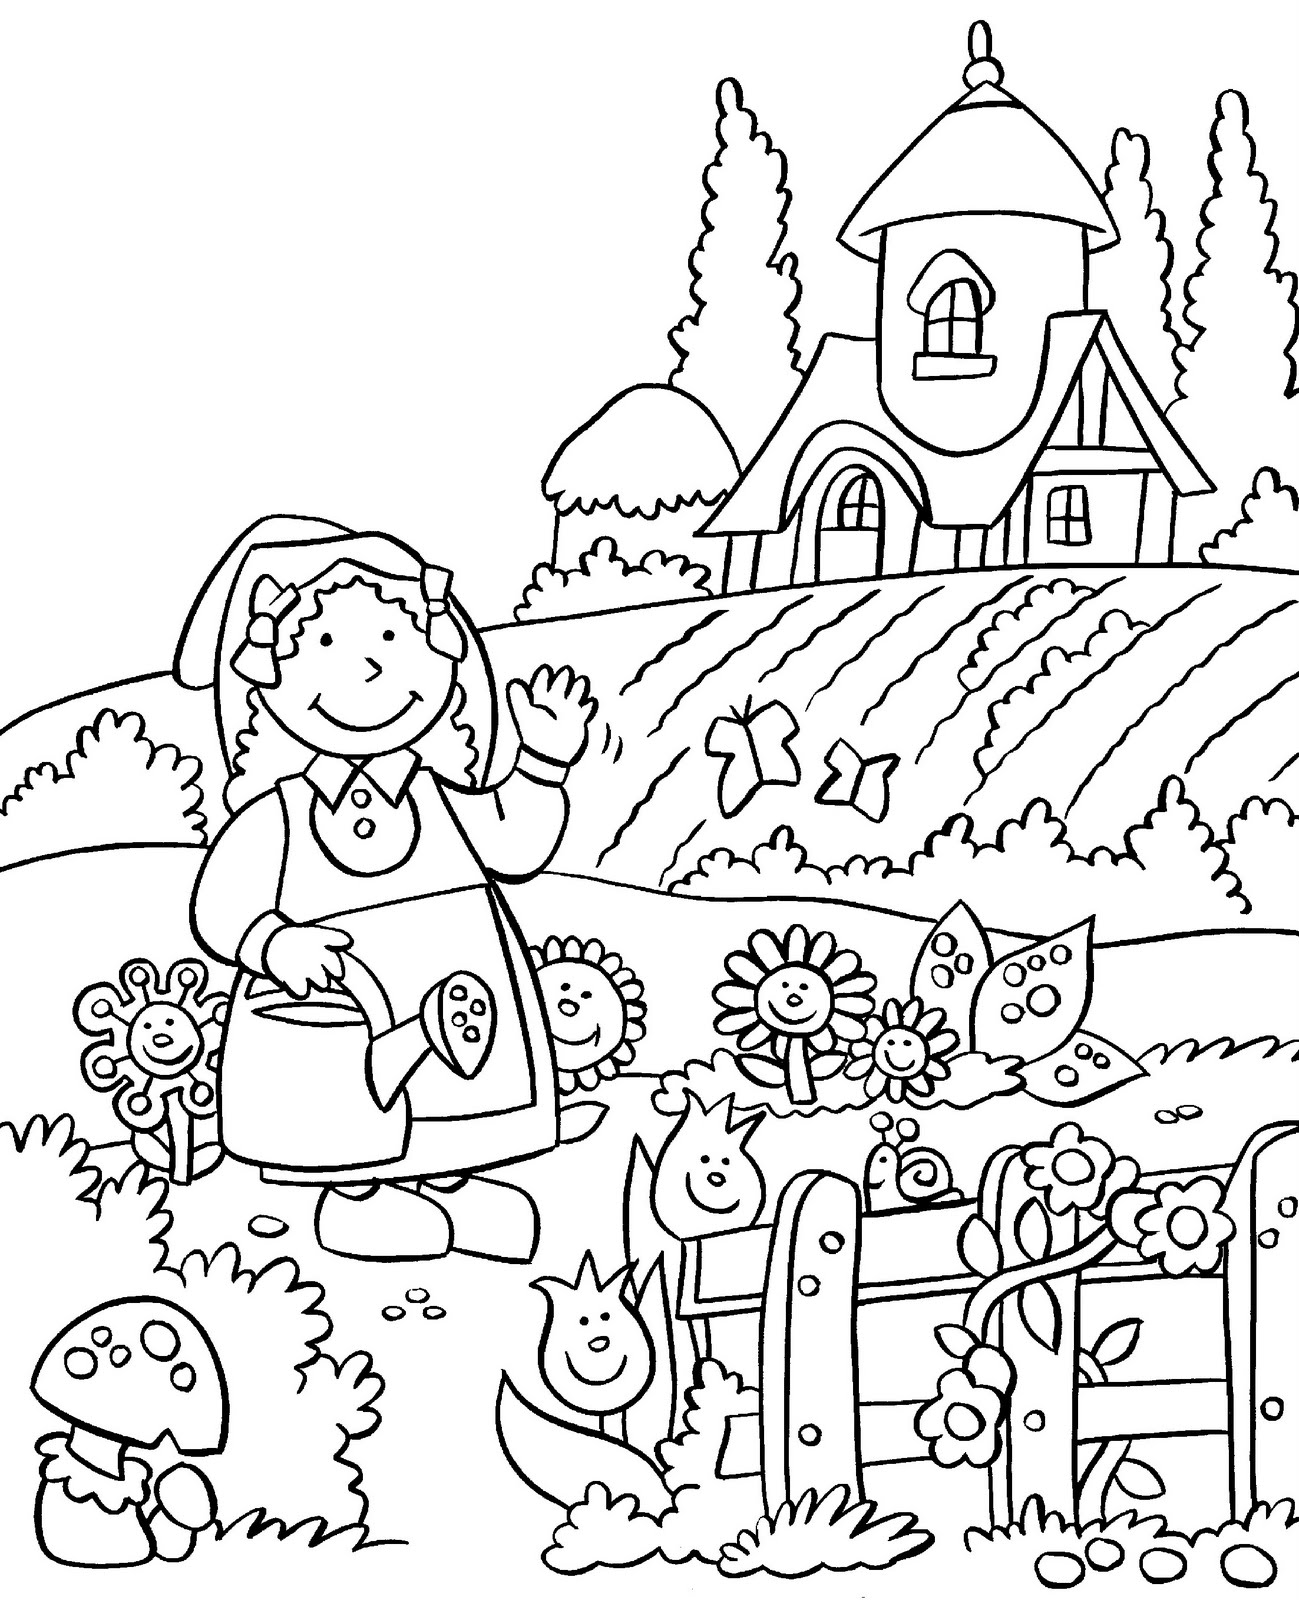 Gardening Coloring Pages   Best Coloring Pages For Kids